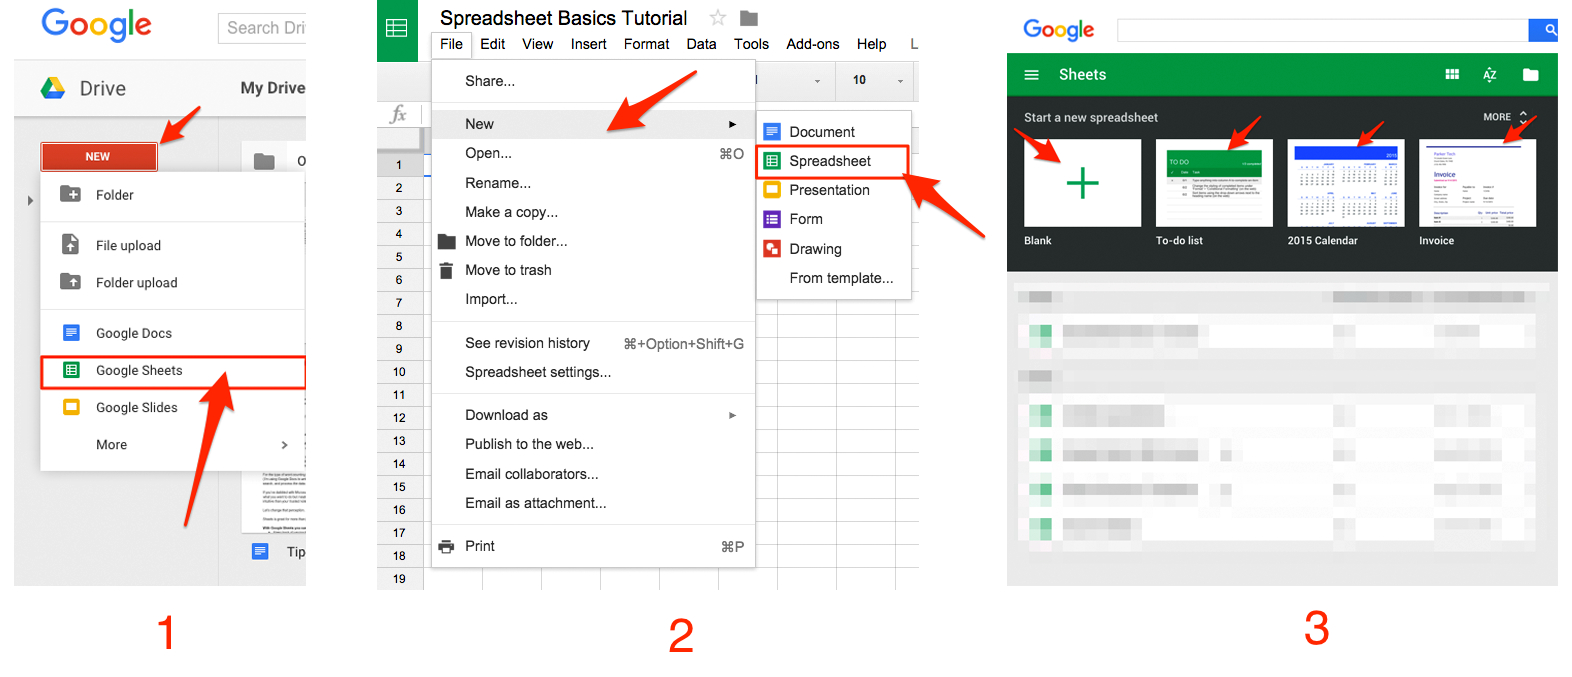 How To Do An Excel Spreadsheet In Google Sheets 101: The Beginner's Guide To Online Spreadsheets  The